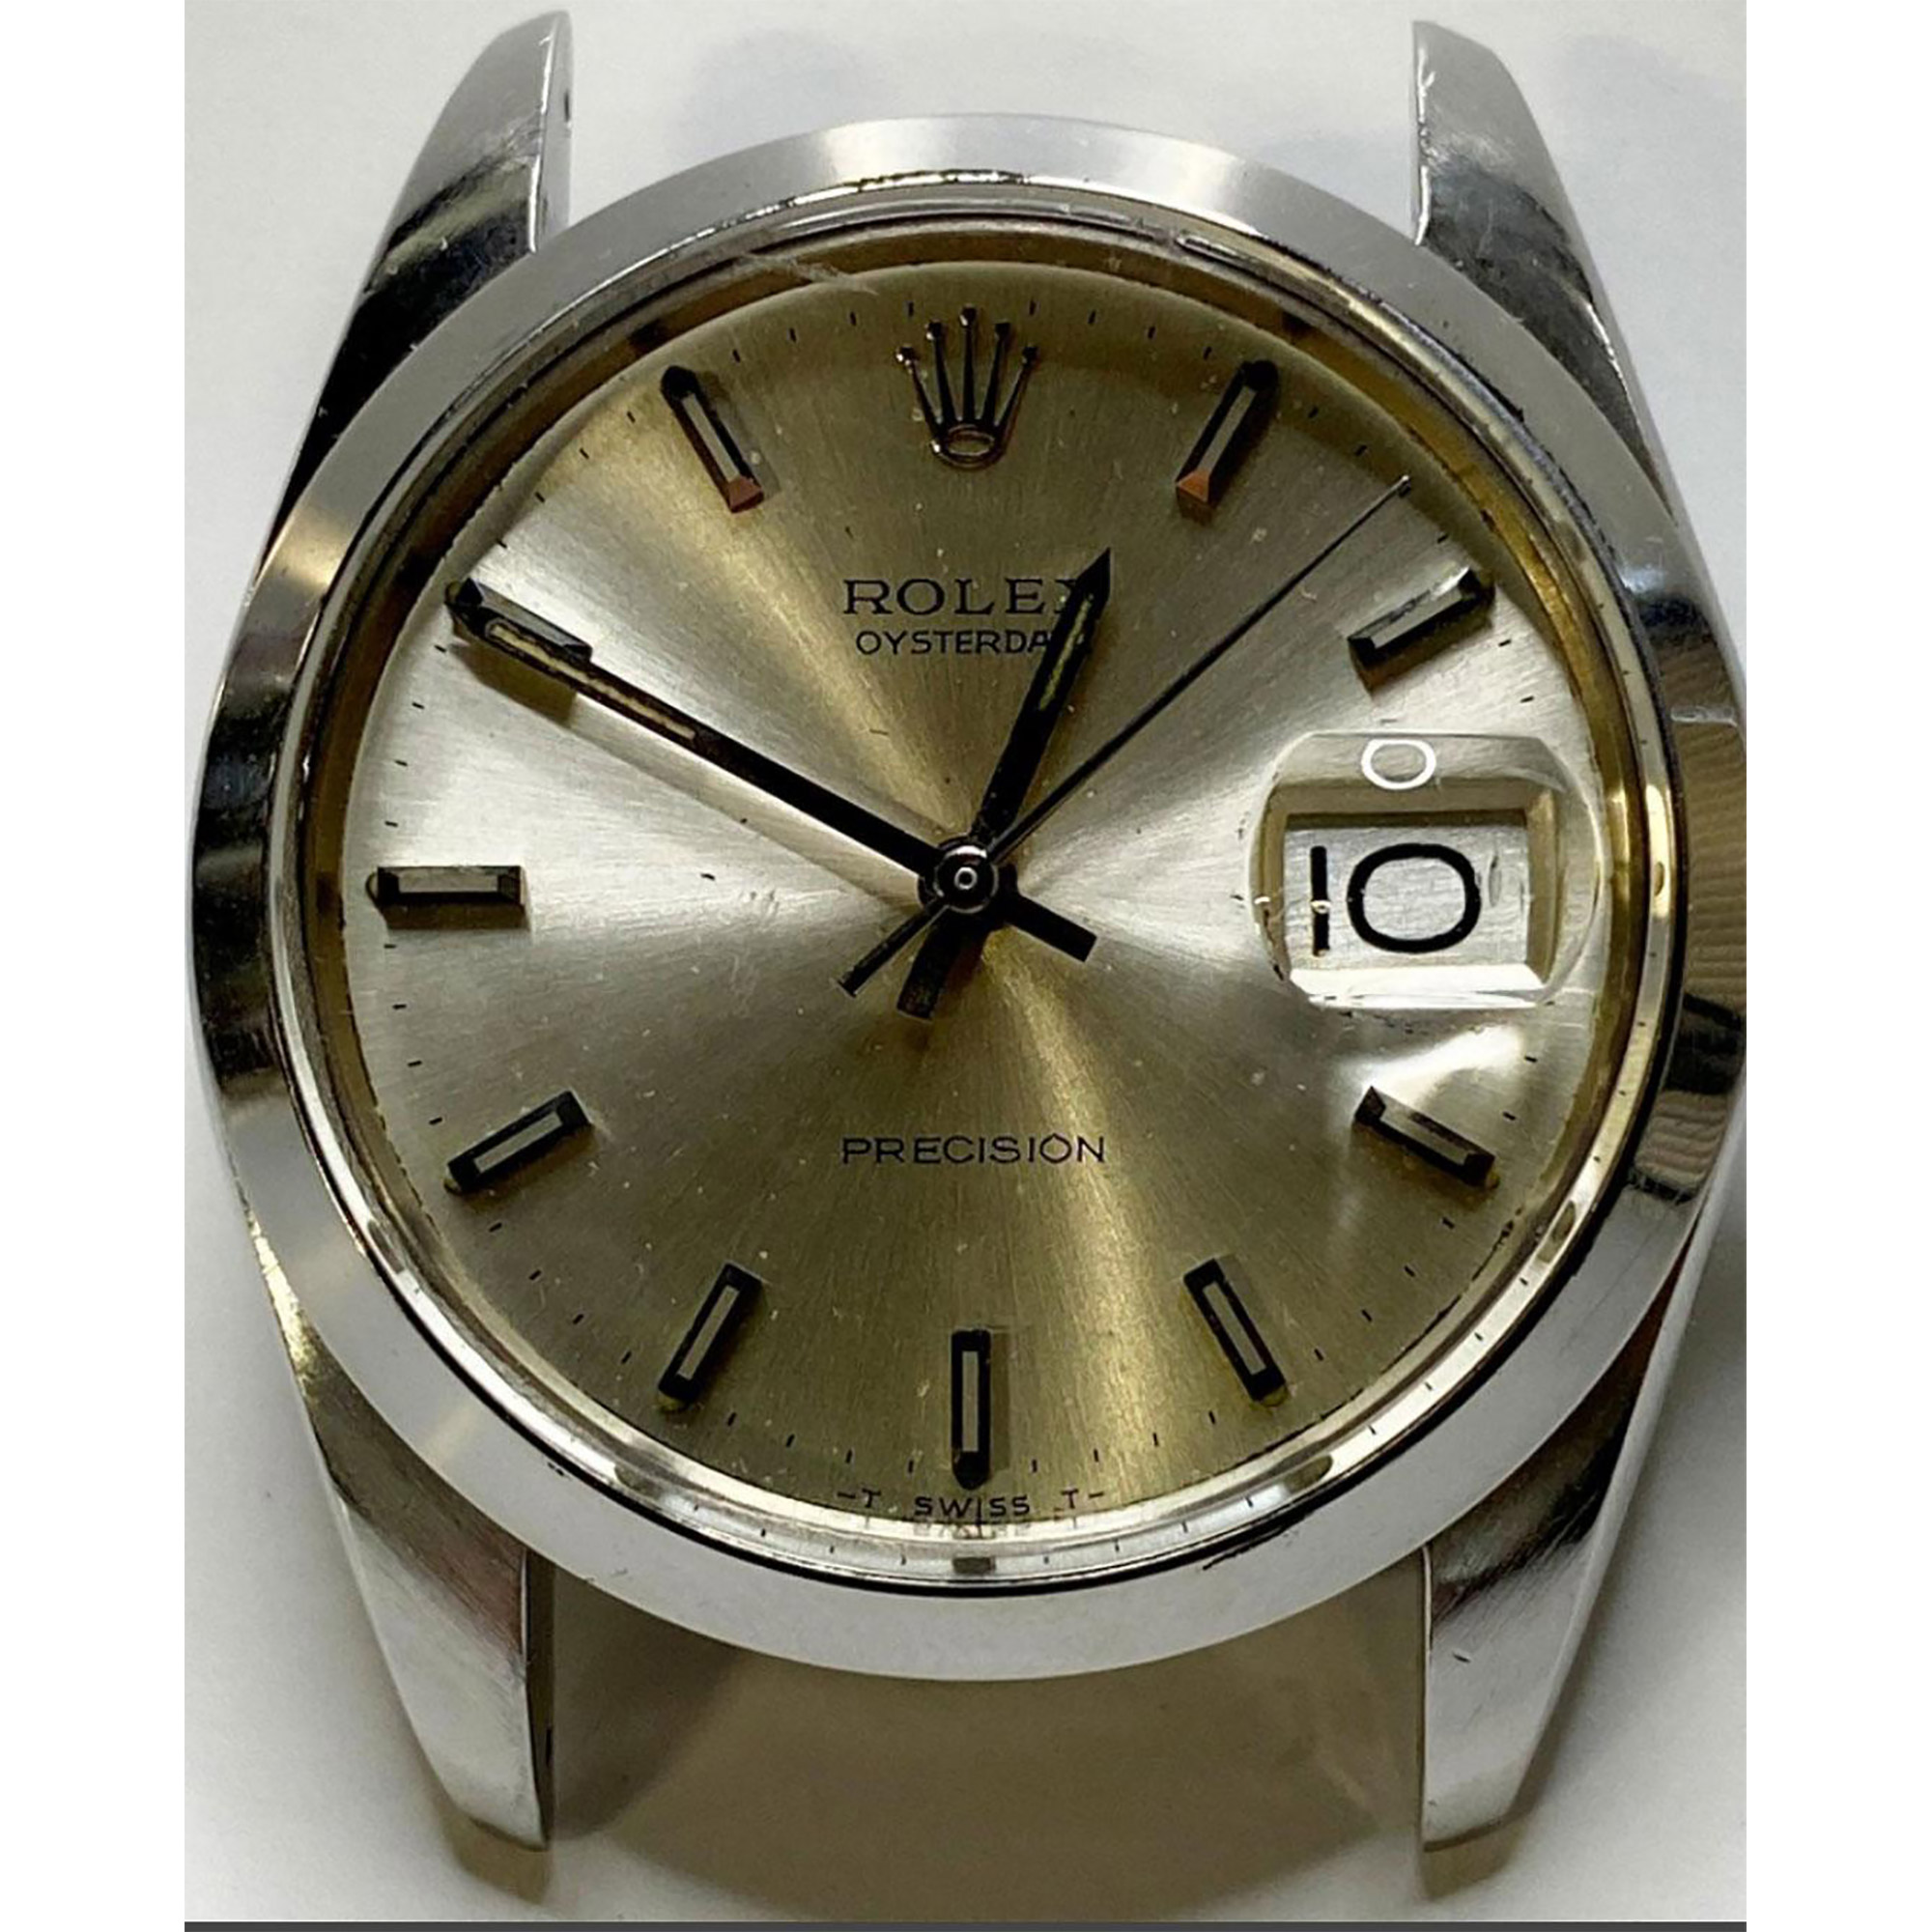 Vintage Rolex Oyster Date Precision Watch, Model 6694 - Image 8 of 12